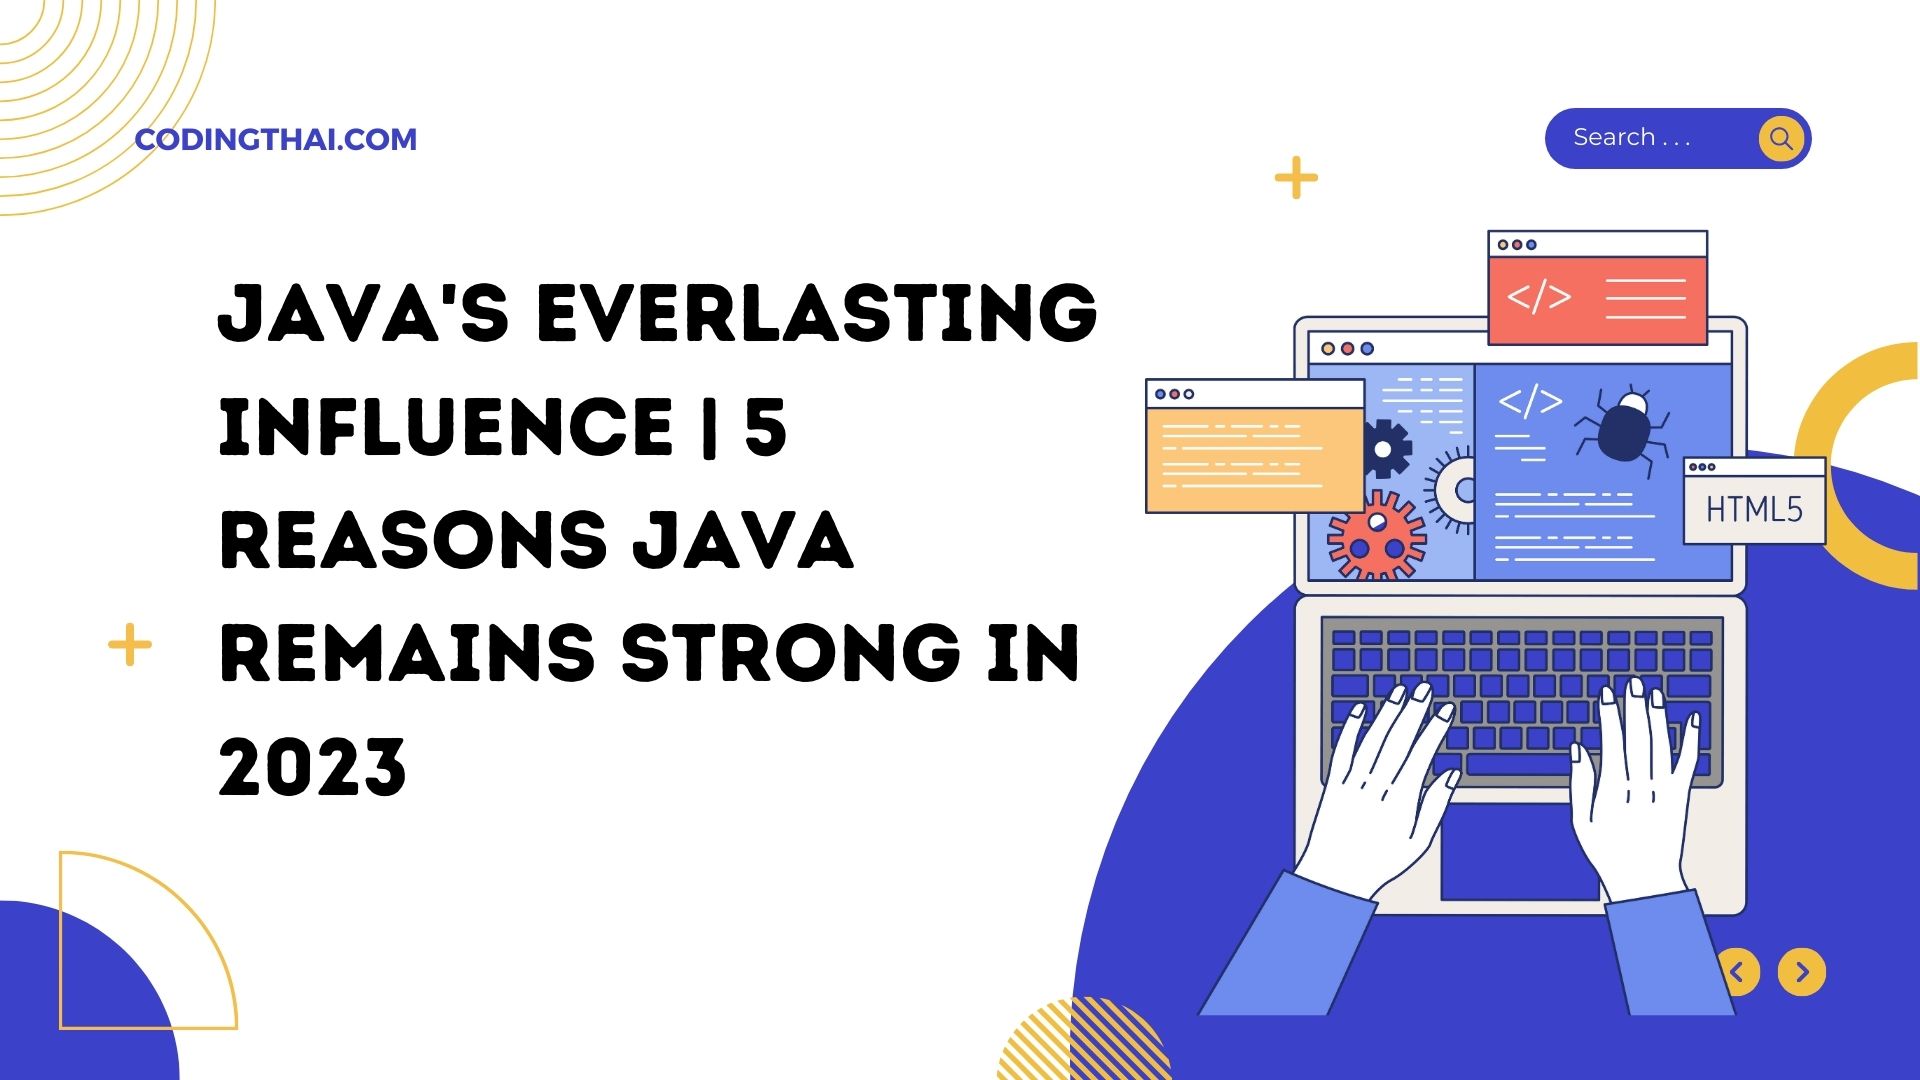 Java's Everlasting Influence: 5 Reasons Java Remains Strong in 2023